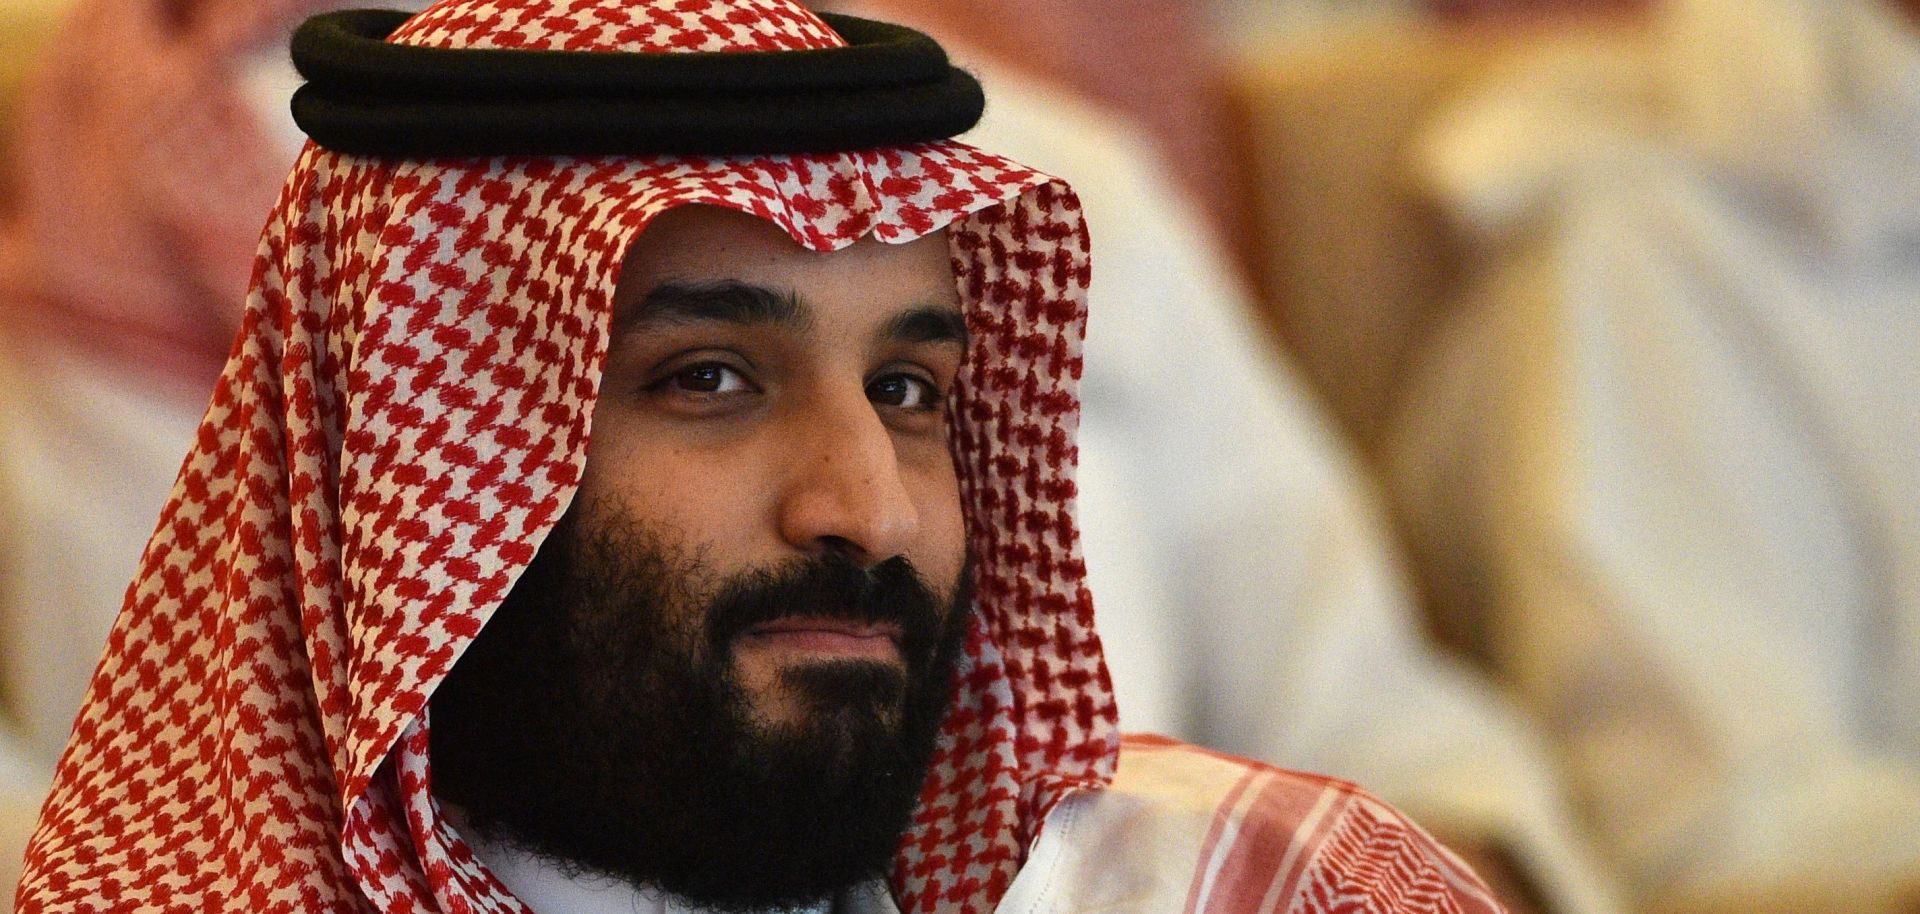 Saudi Crown Prince Mohammed bin Salman attends the Future Investment Initiative conference in Riyadh on Oct. 23.